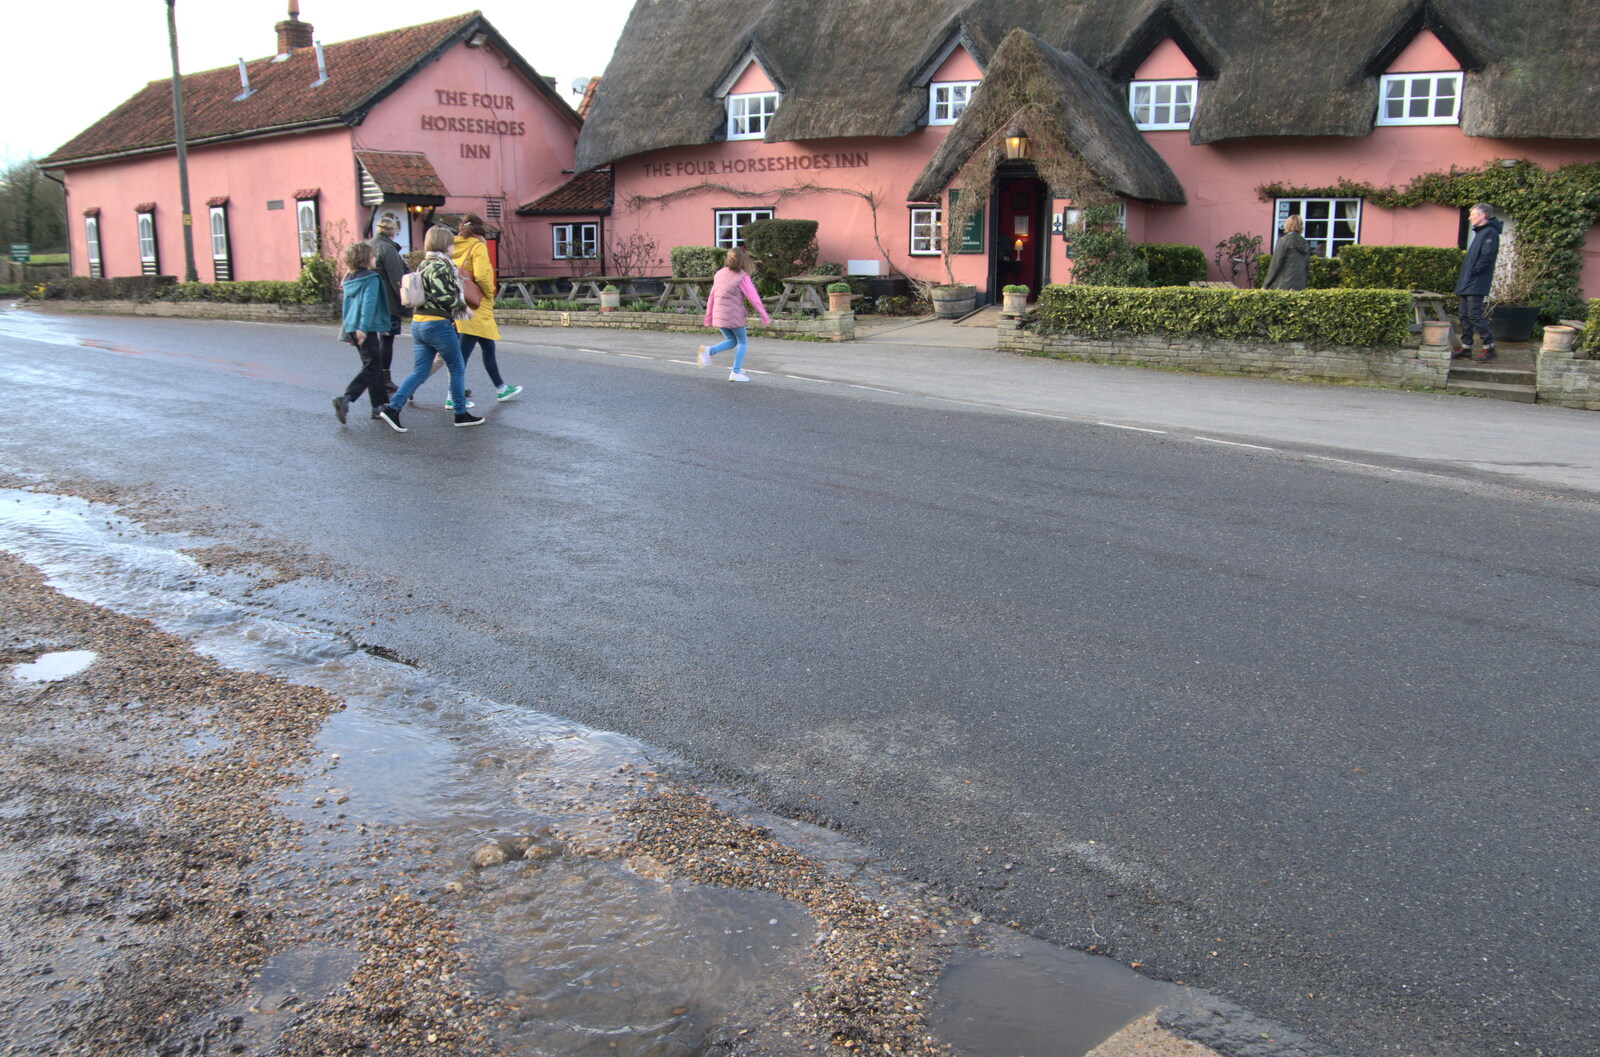 Crossing the Rubicon from Sunday Lunch and a SwiftKey Trip to Nando's, Thornham and Bayswater - 22nd February 2020